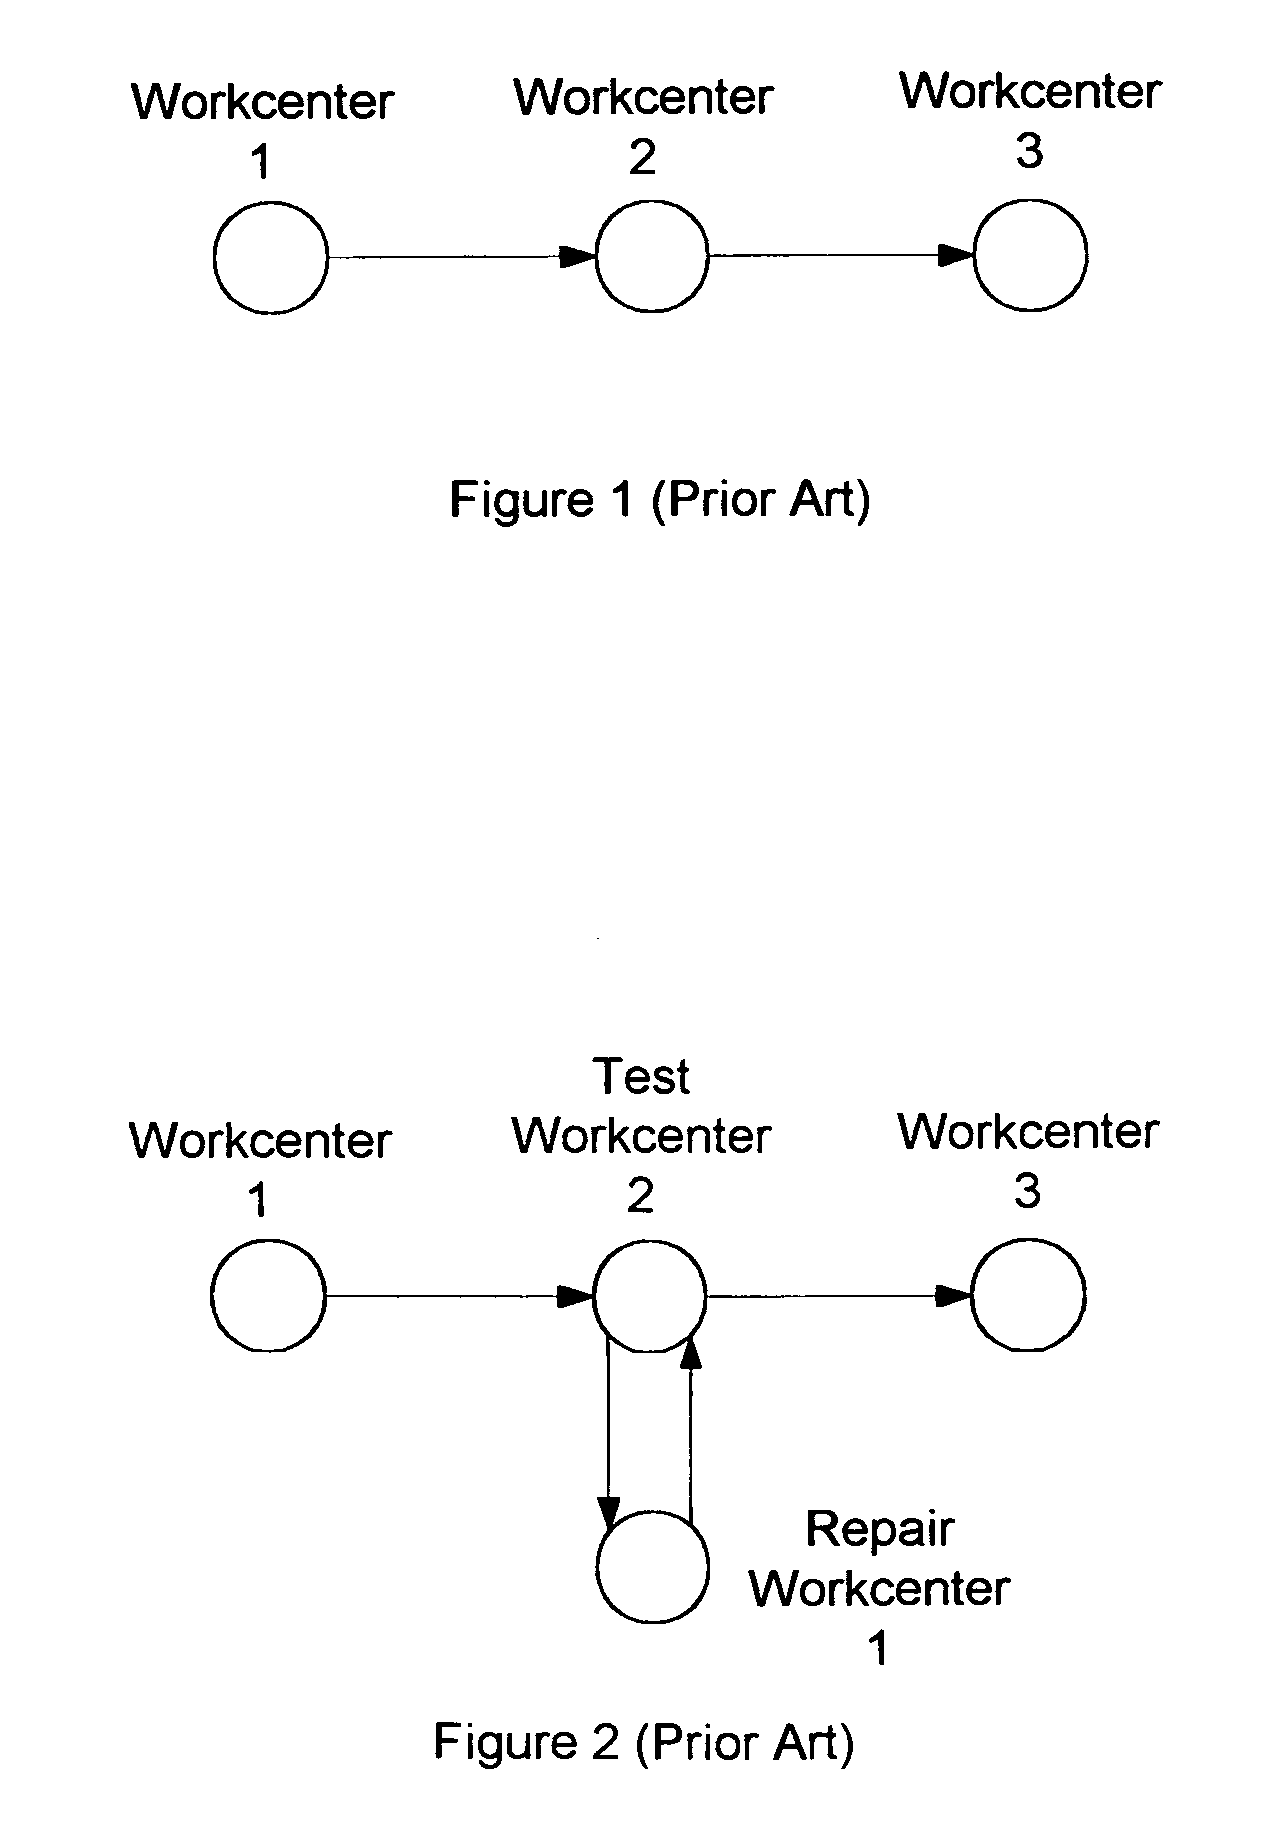 Directed defective item repair system and methods